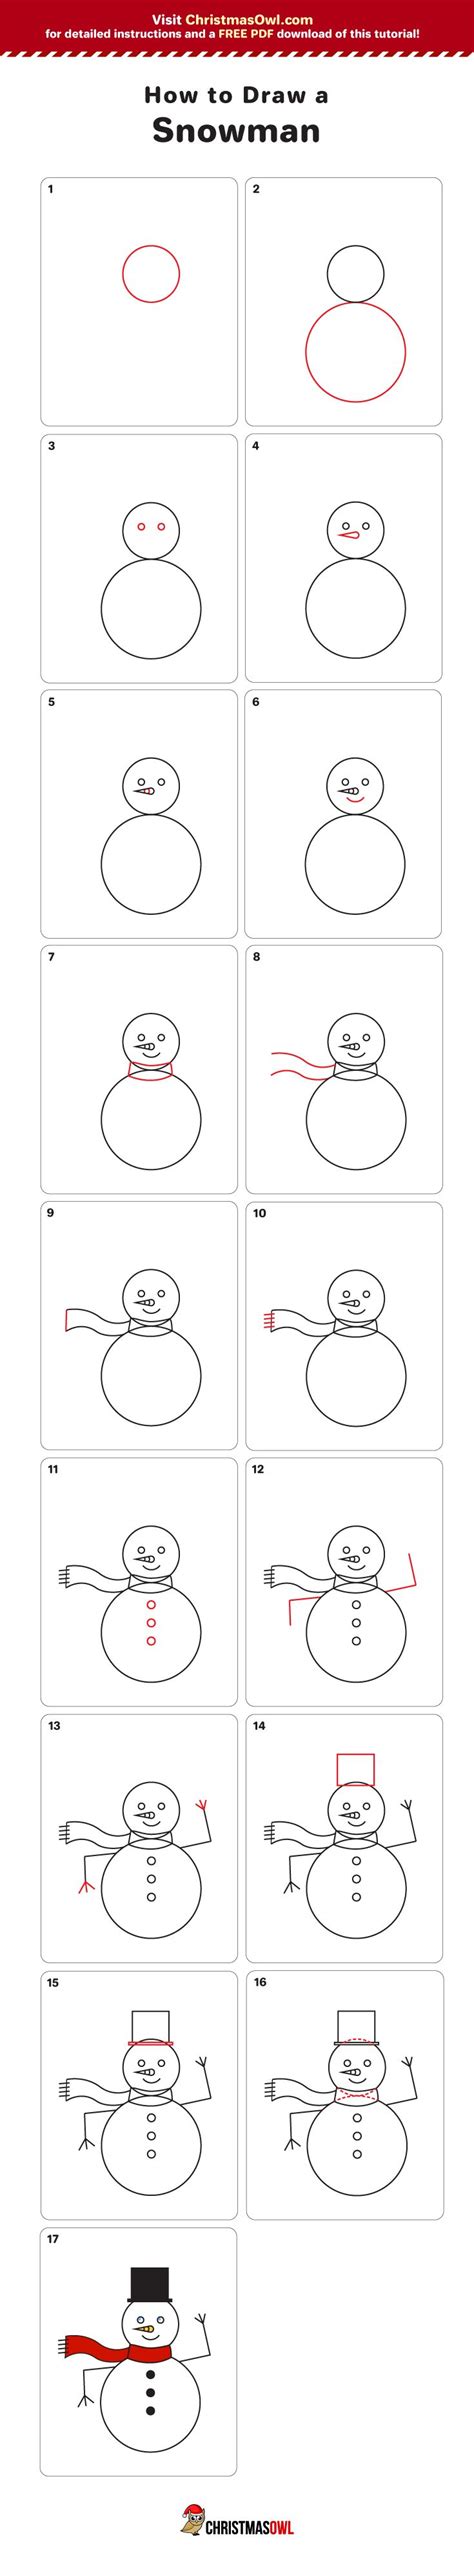 Learn How To Draw A Snowman Step By Step Download A Free Pdf Of This